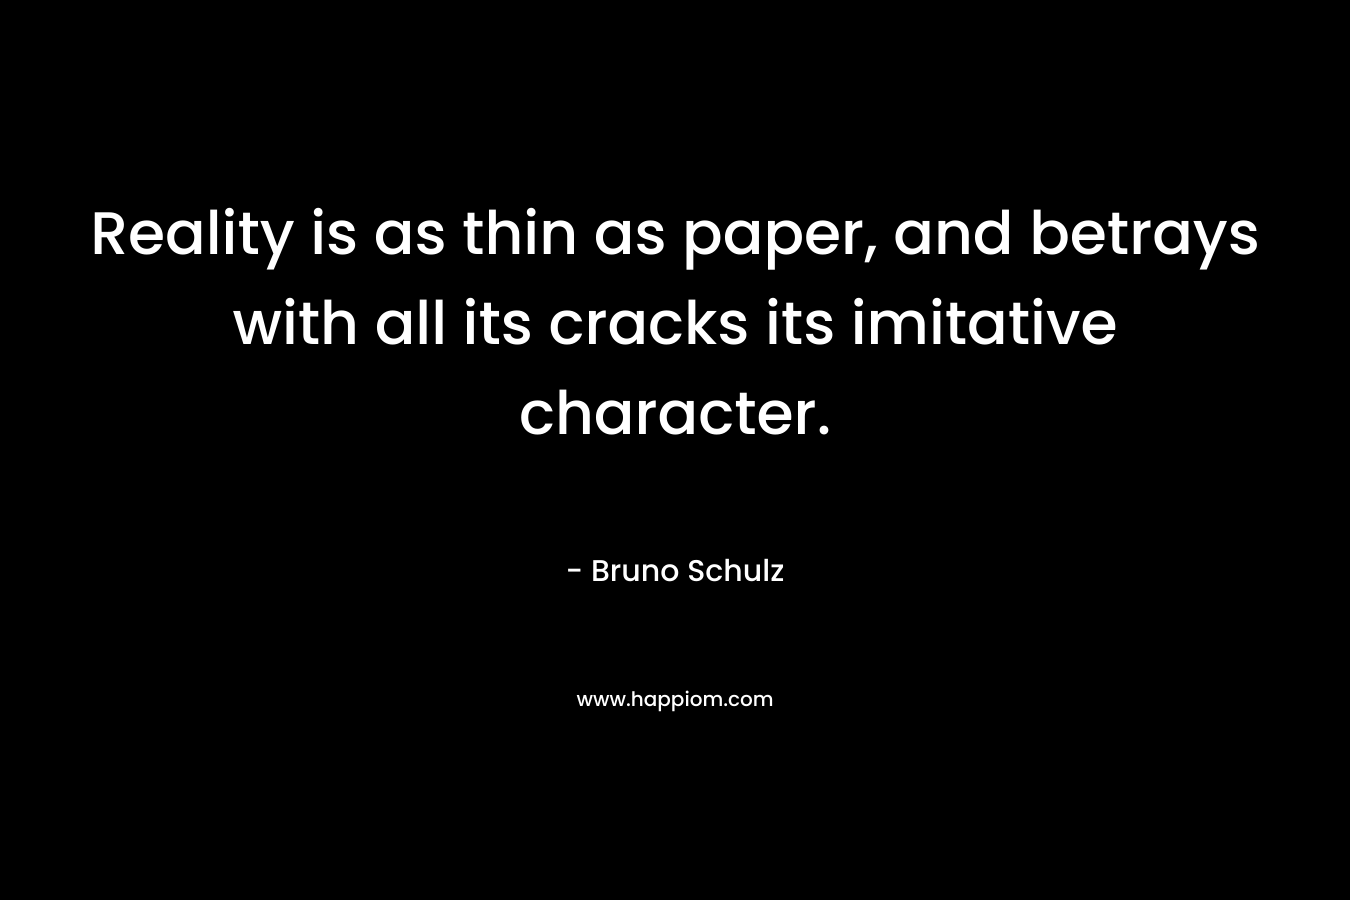 Reality is as thin as paper, and betrays with all its cracks its imitative character. – Bruno Schulz